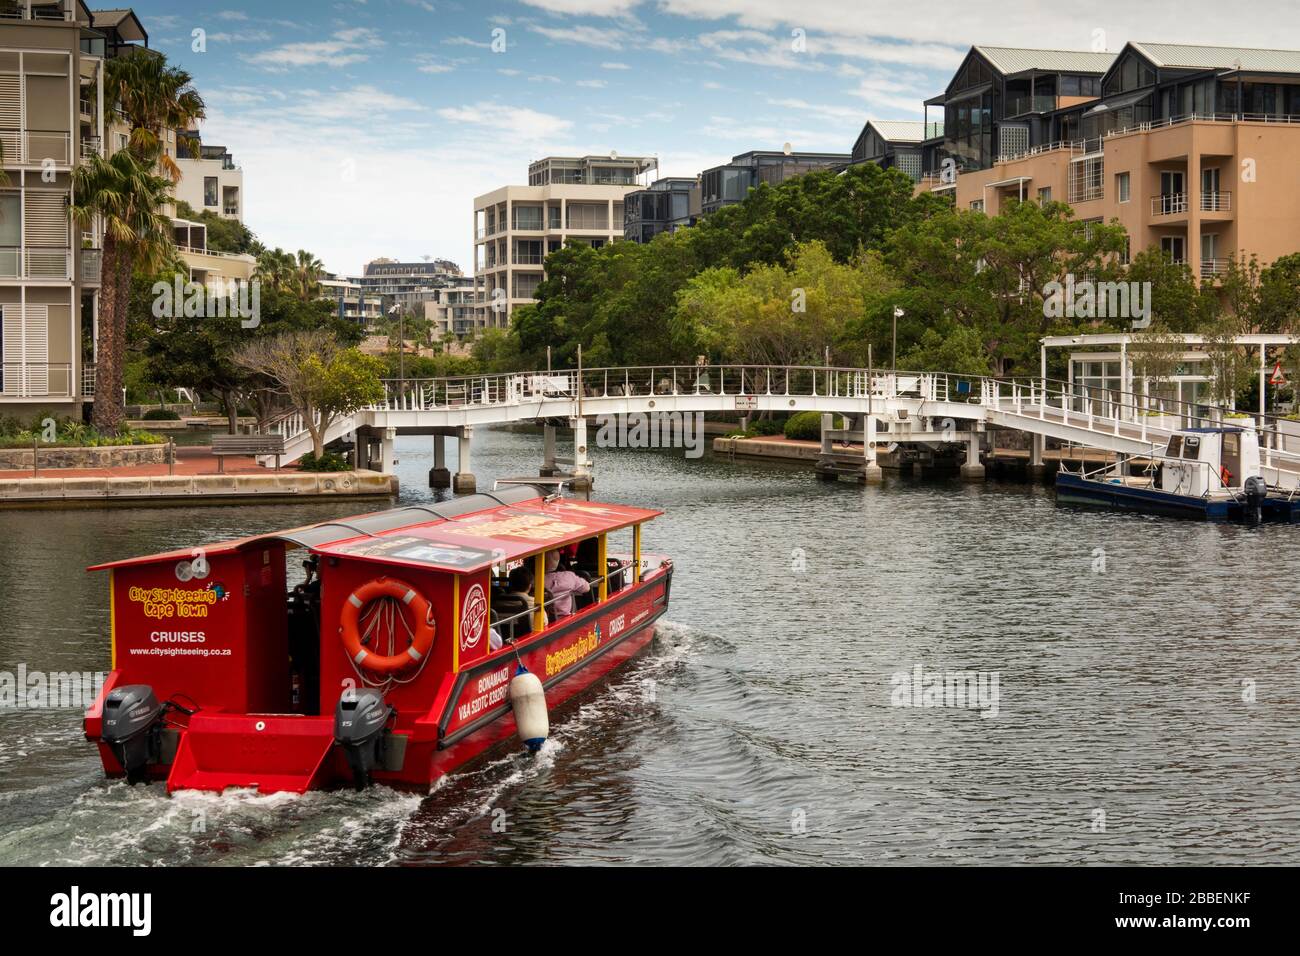 South Africa, Western Cape, Cape Town, Victoria and Alfred Waterfront, red City Sightseeing cruise boat passing through upmarket waterside housing on Stock Photo